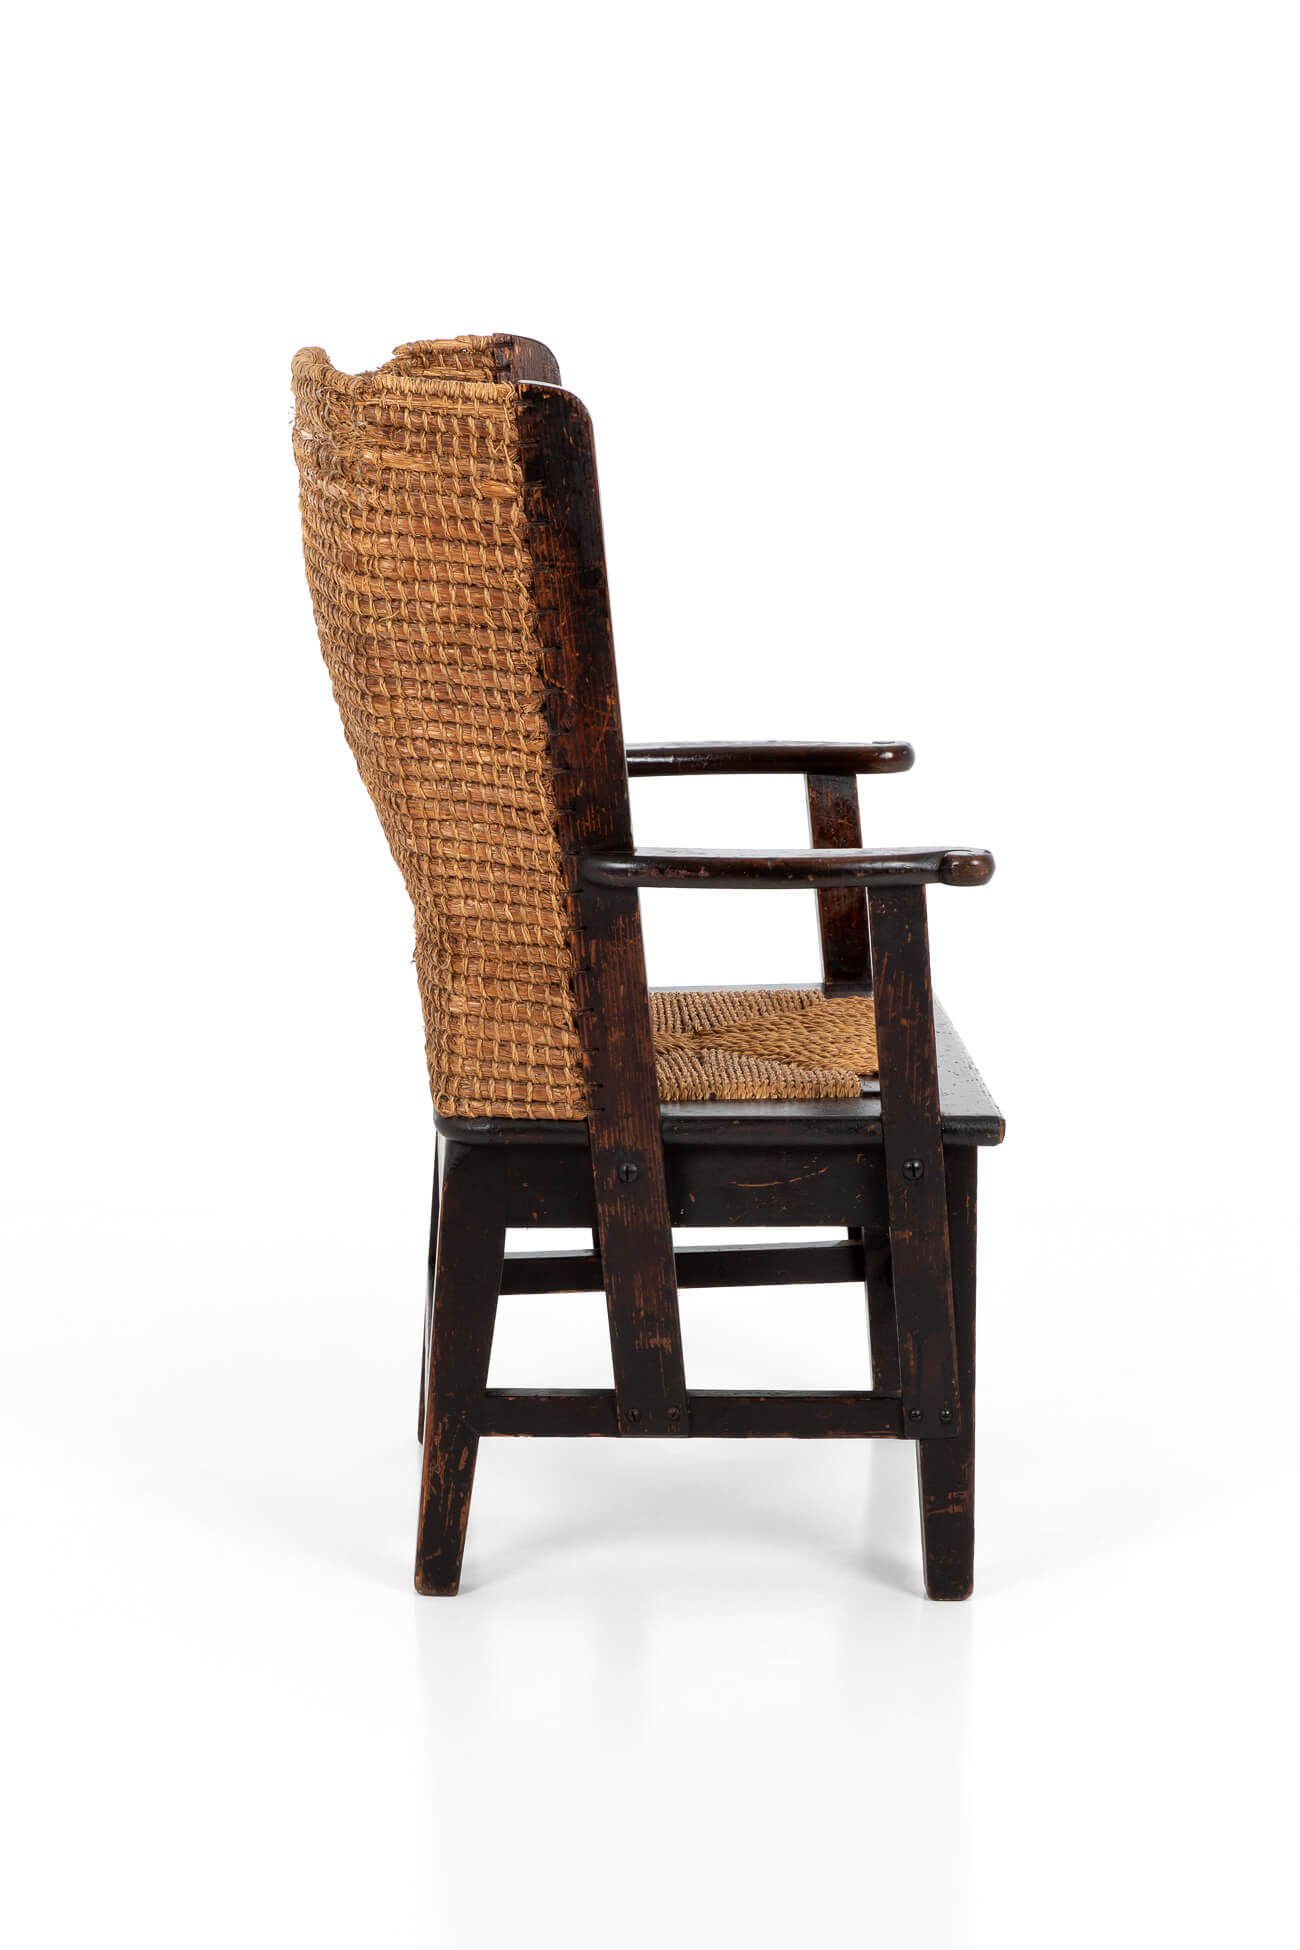 antique Orkney chair